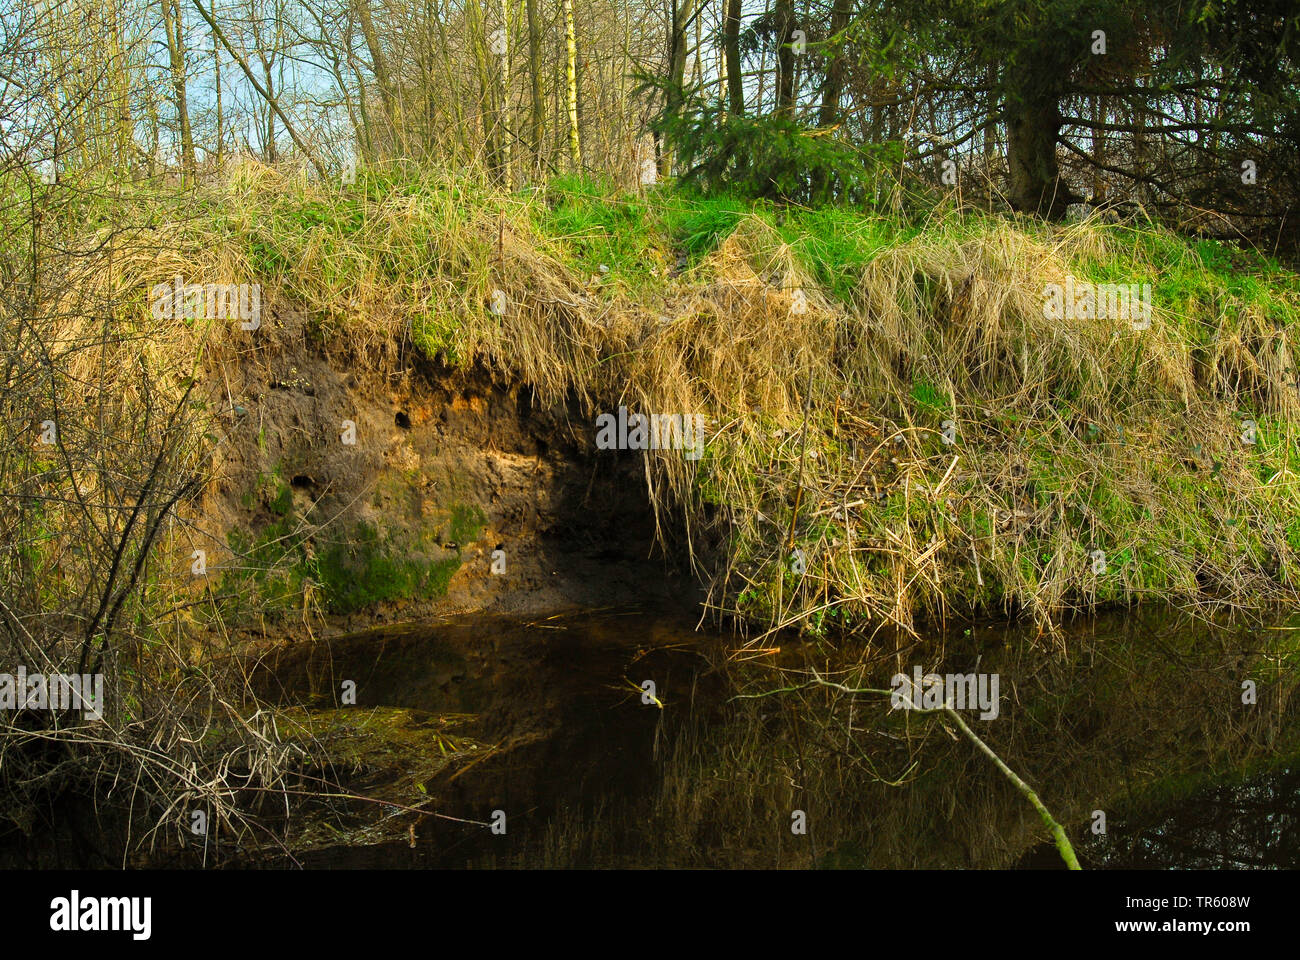 river kingfisher (Alcedo atthis), breeding place in a creek bank, Germany Stock Photo